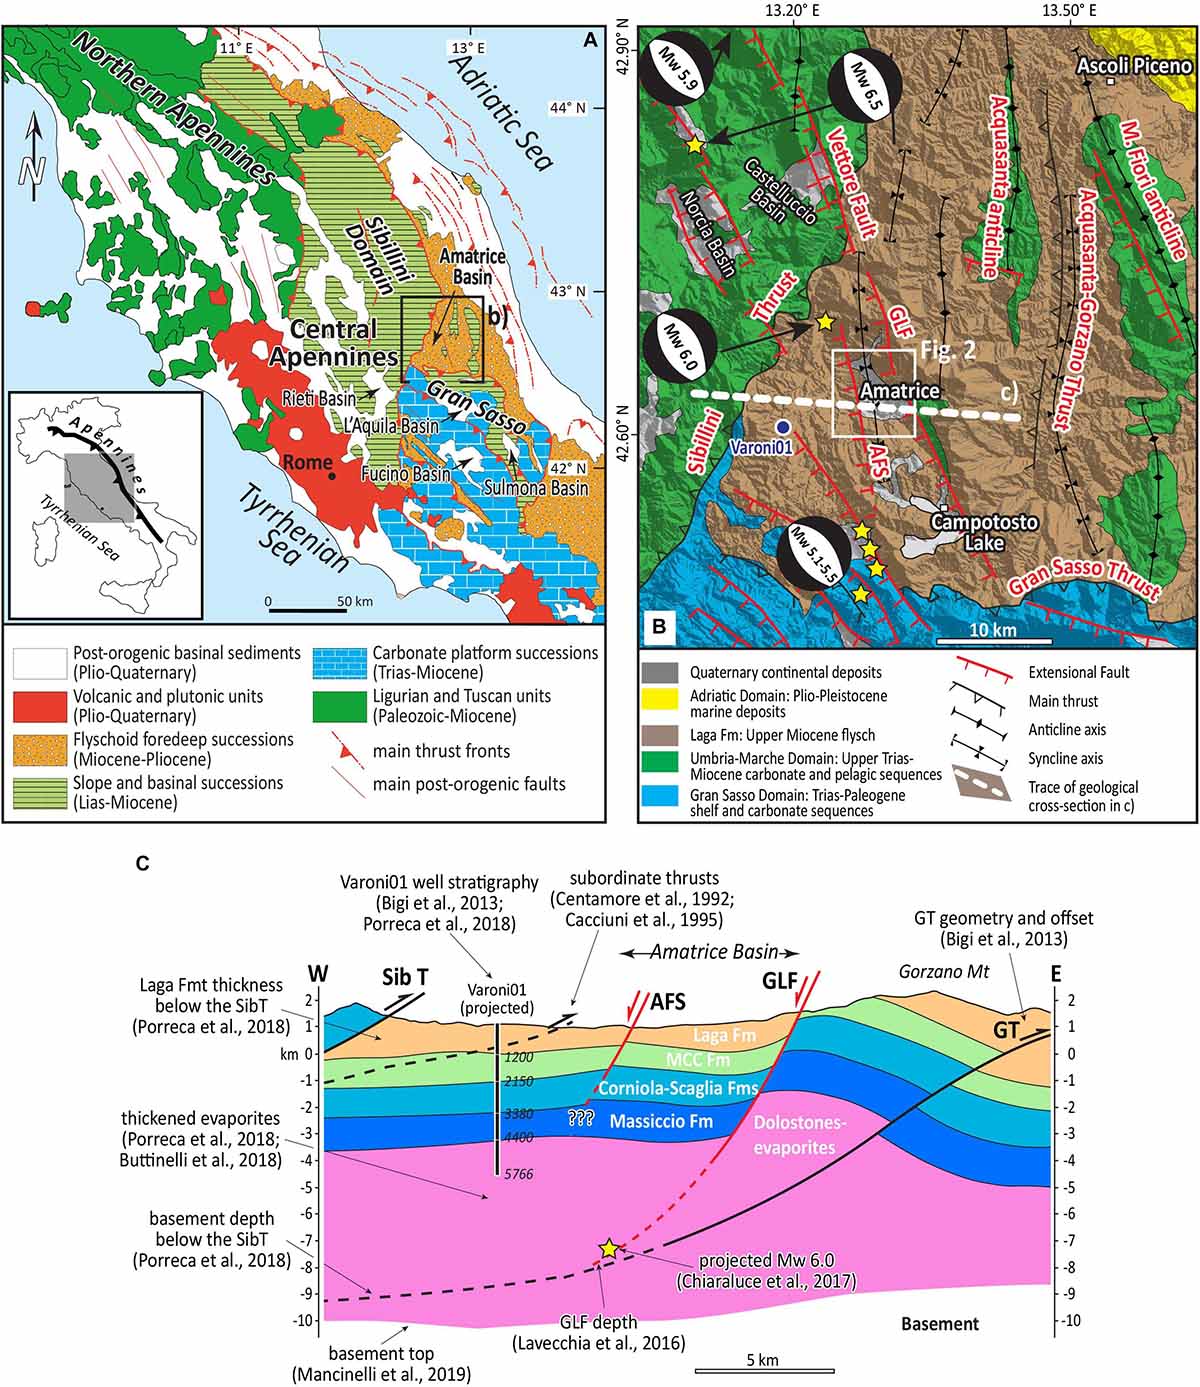 PDF) Late Miocene shortening of the Northern Apennines back-arc